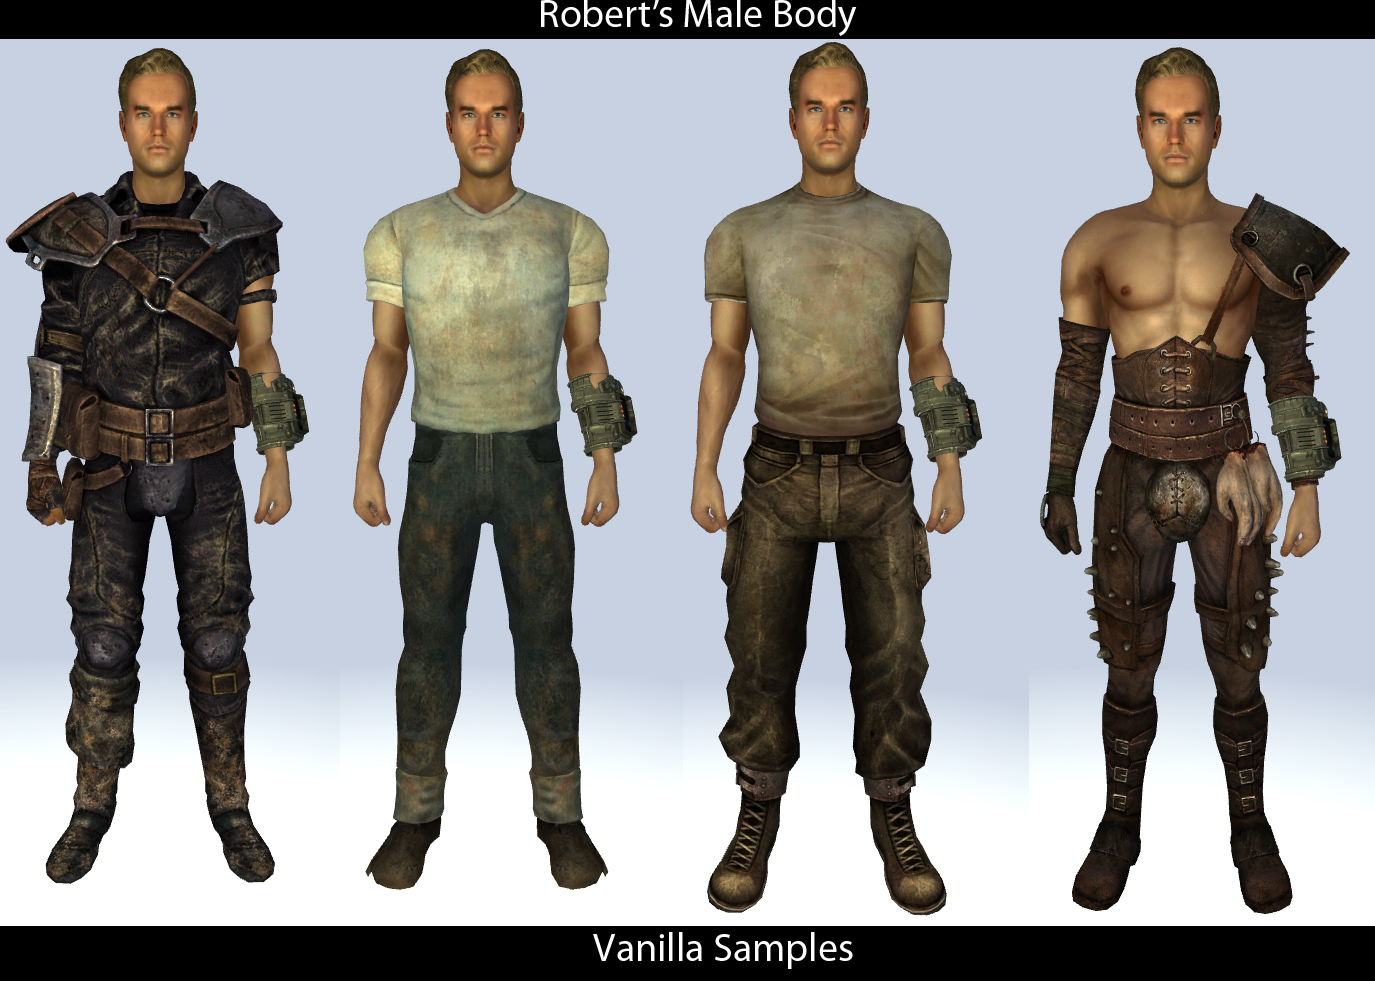 Roberts Male Body FNV